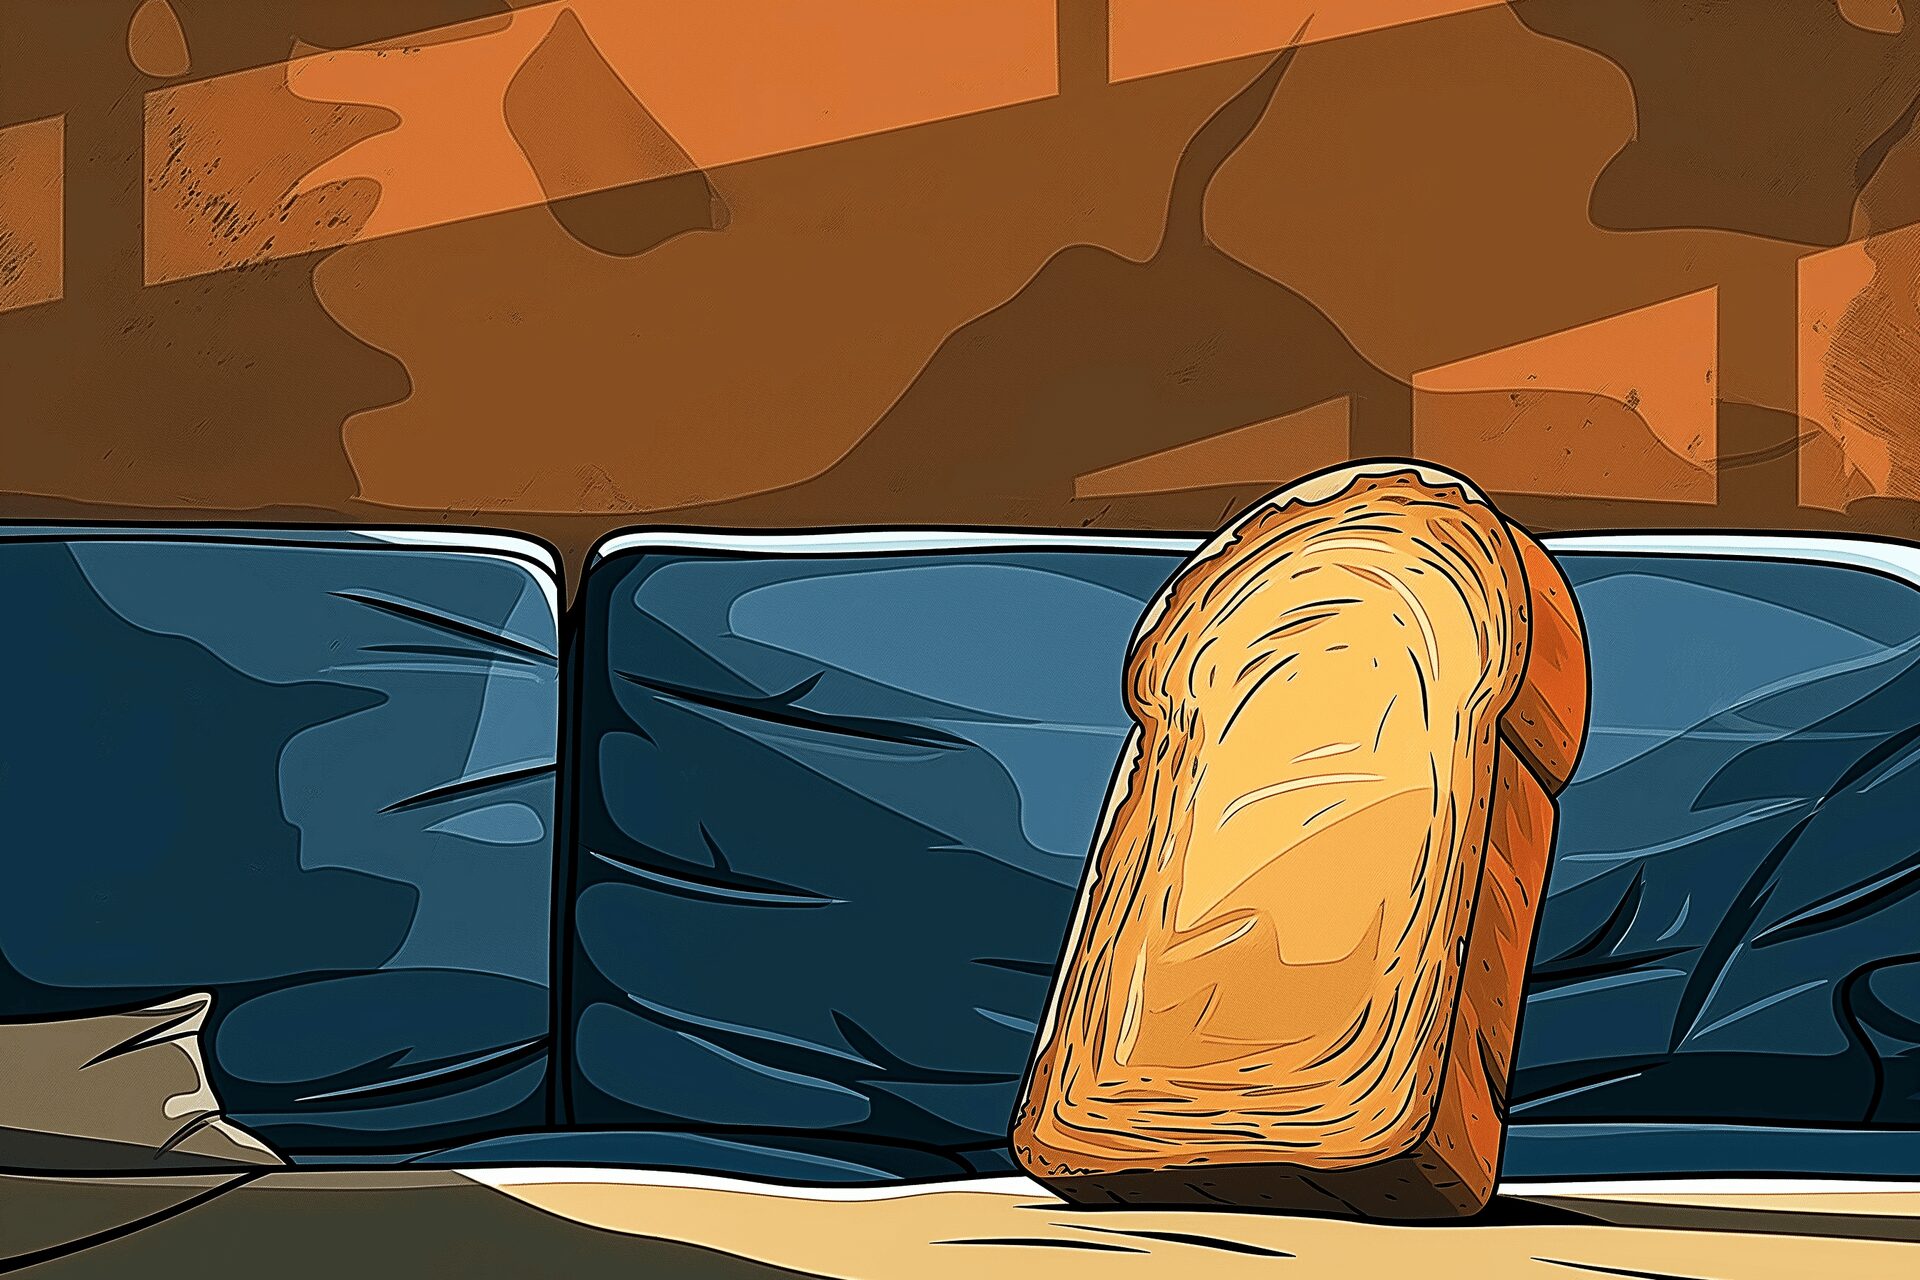 A piece of bread standing upright on a couch